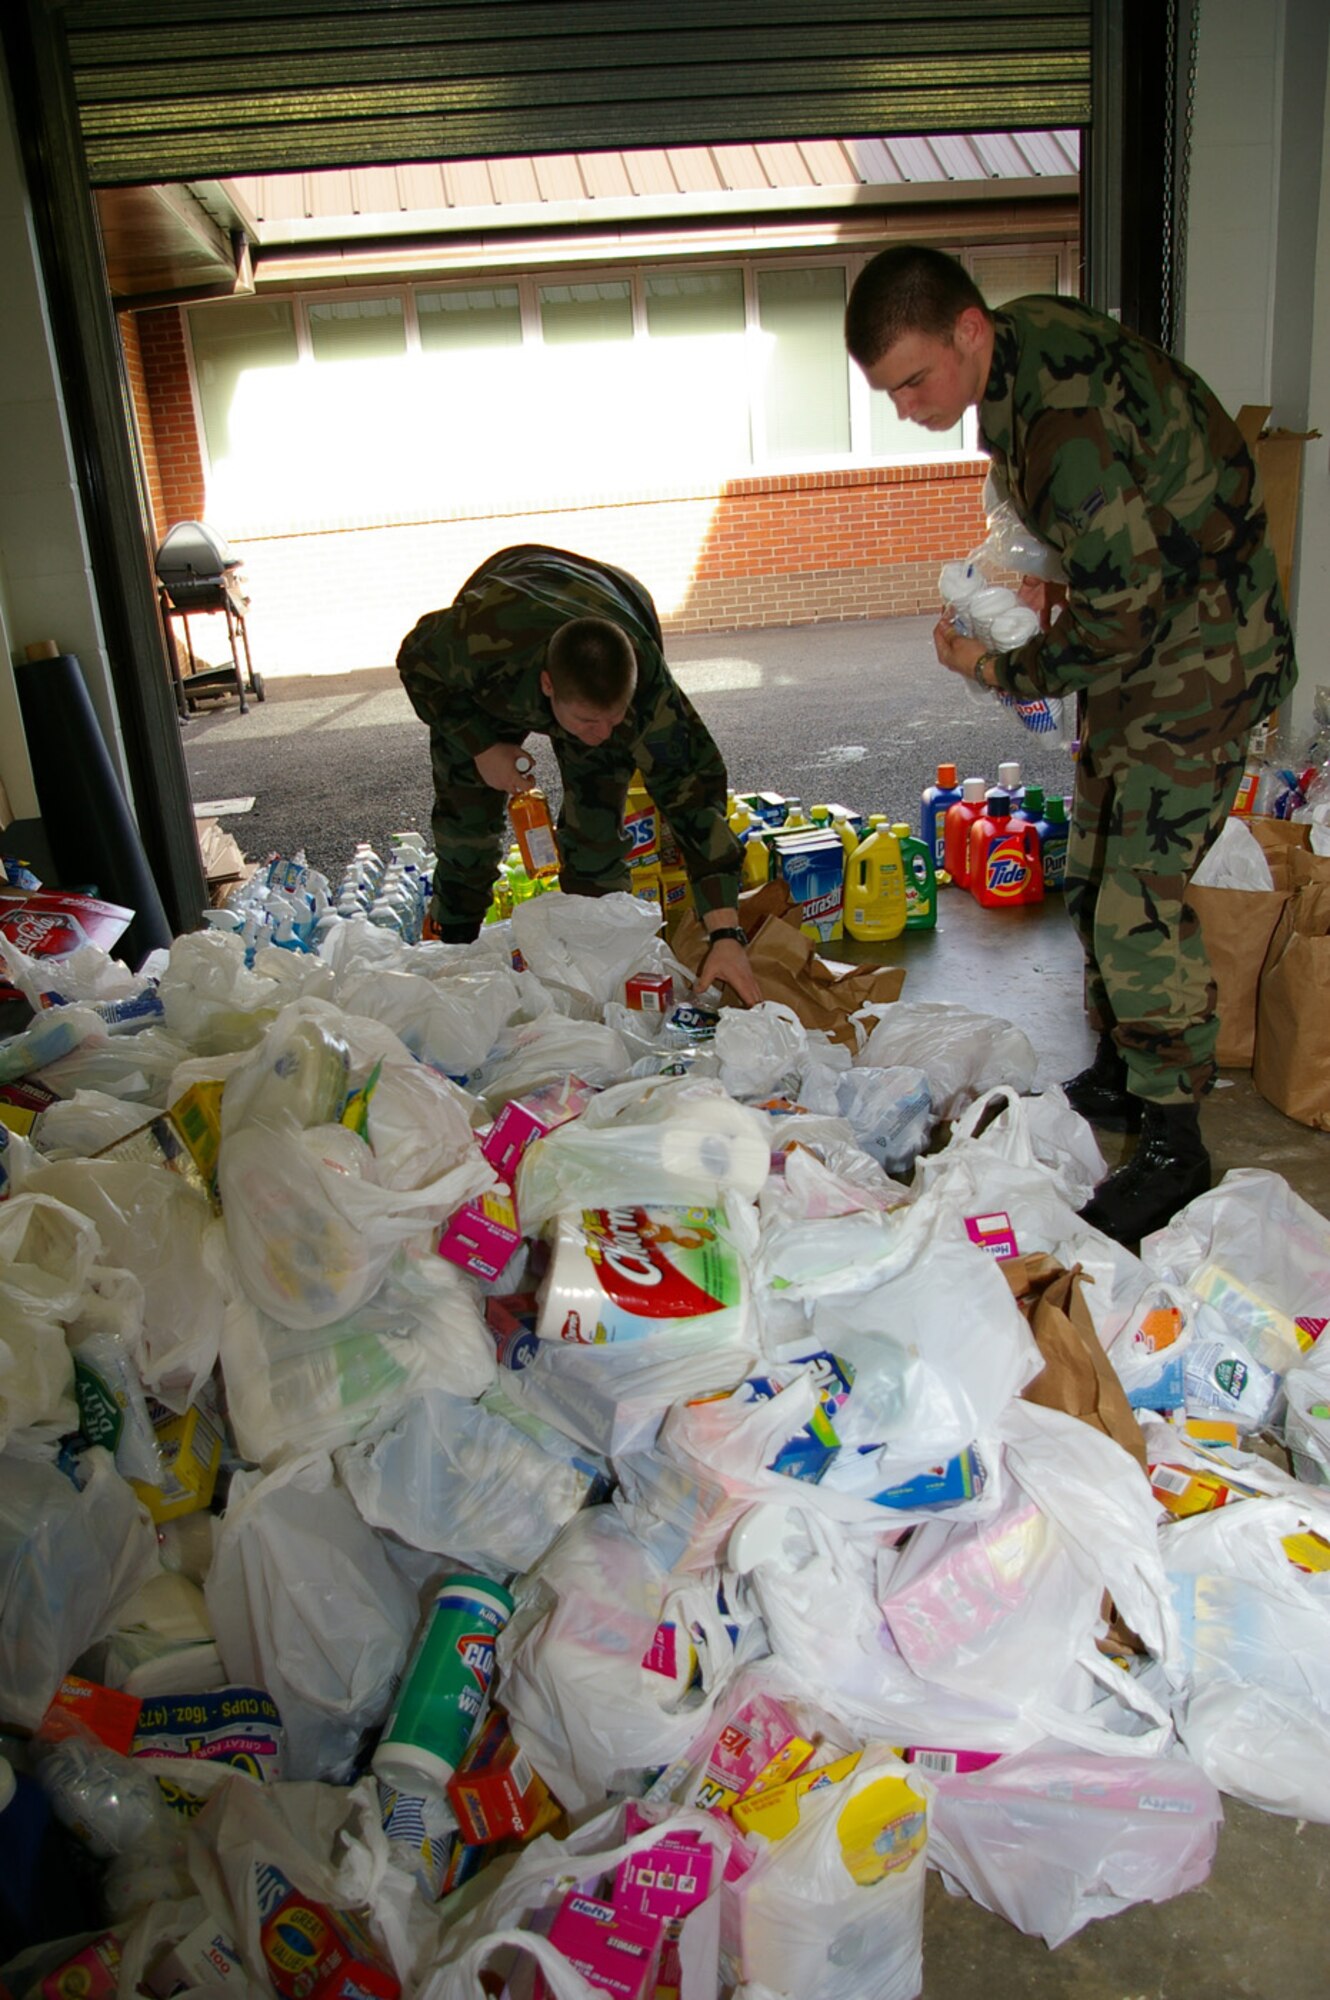 Airmen from the 100th Operations Support Squadron sort through donations from military members and their families donated March 3 and 4 at the RAF Lakenheath Commissary. Members from the 100th Operations Group's Galaxy Team 5/6 committee spent the weekend collecting items as part of the wounded soldier item drive. The items collected will be sent to the Fisher House at Landstuhl in Germany. More than 50 shopping carts-worth of goods were donated; including foil; dishwashing liquid; toilet rolls; paper plates and plastic cutlery; and packets of sugar. (U.S. Air Force photo by Karen Abeyasekere)